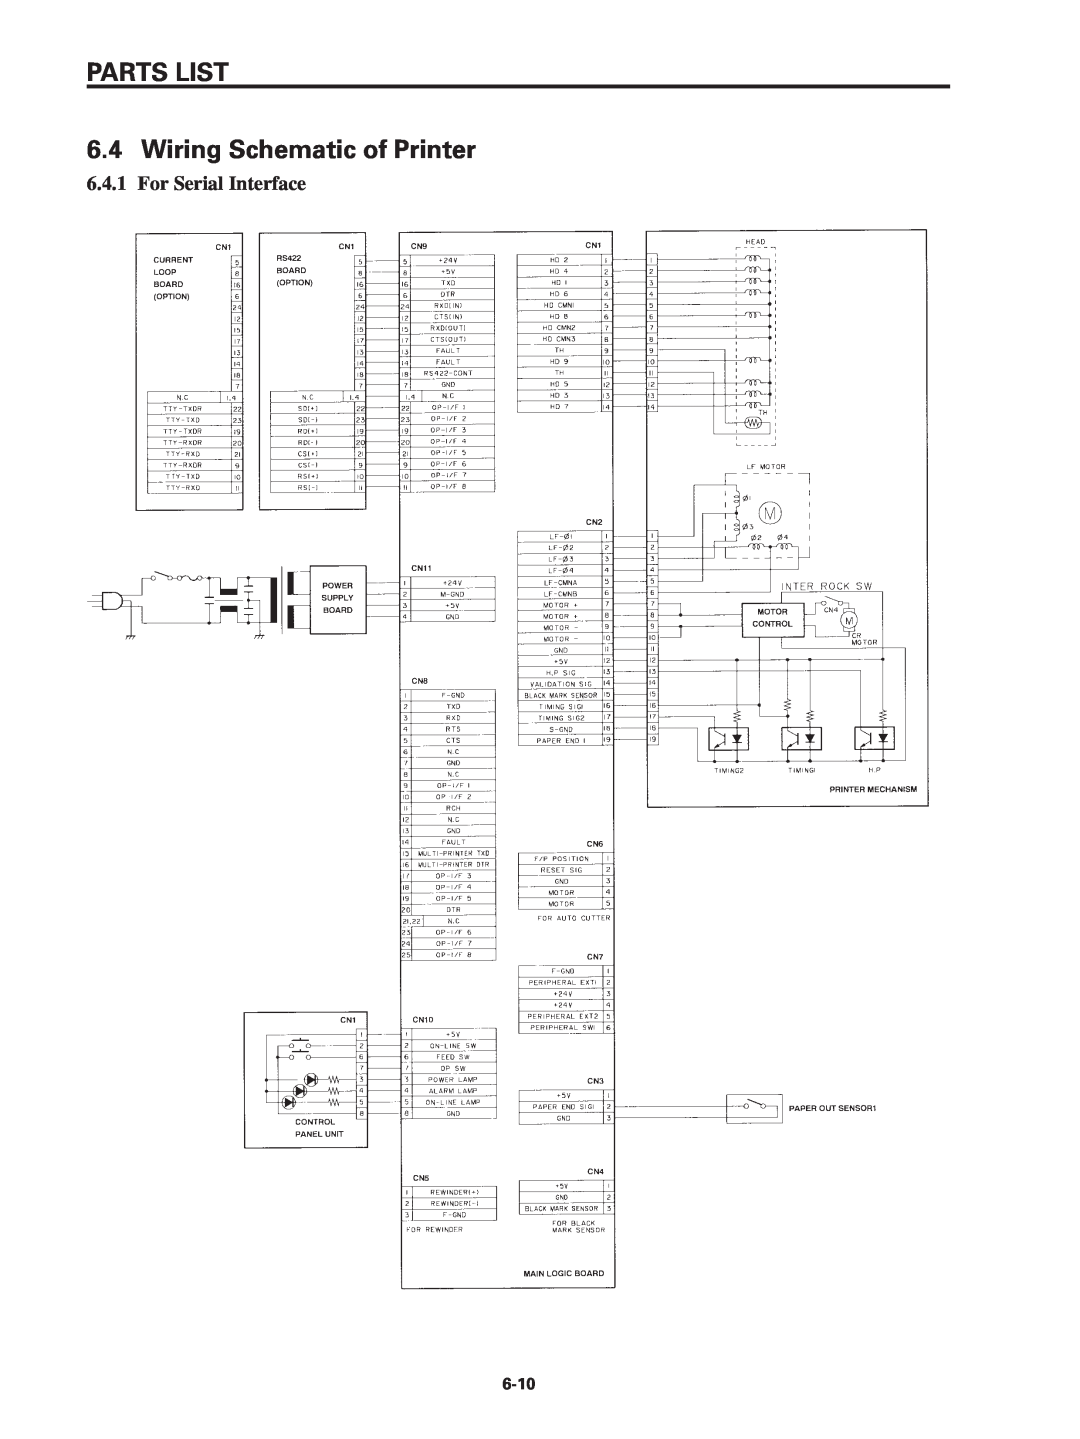 Star Micronics SP320S technical manual PARTS LIST 6.4 Wiring Schematic of Printer, For Serial Interface 